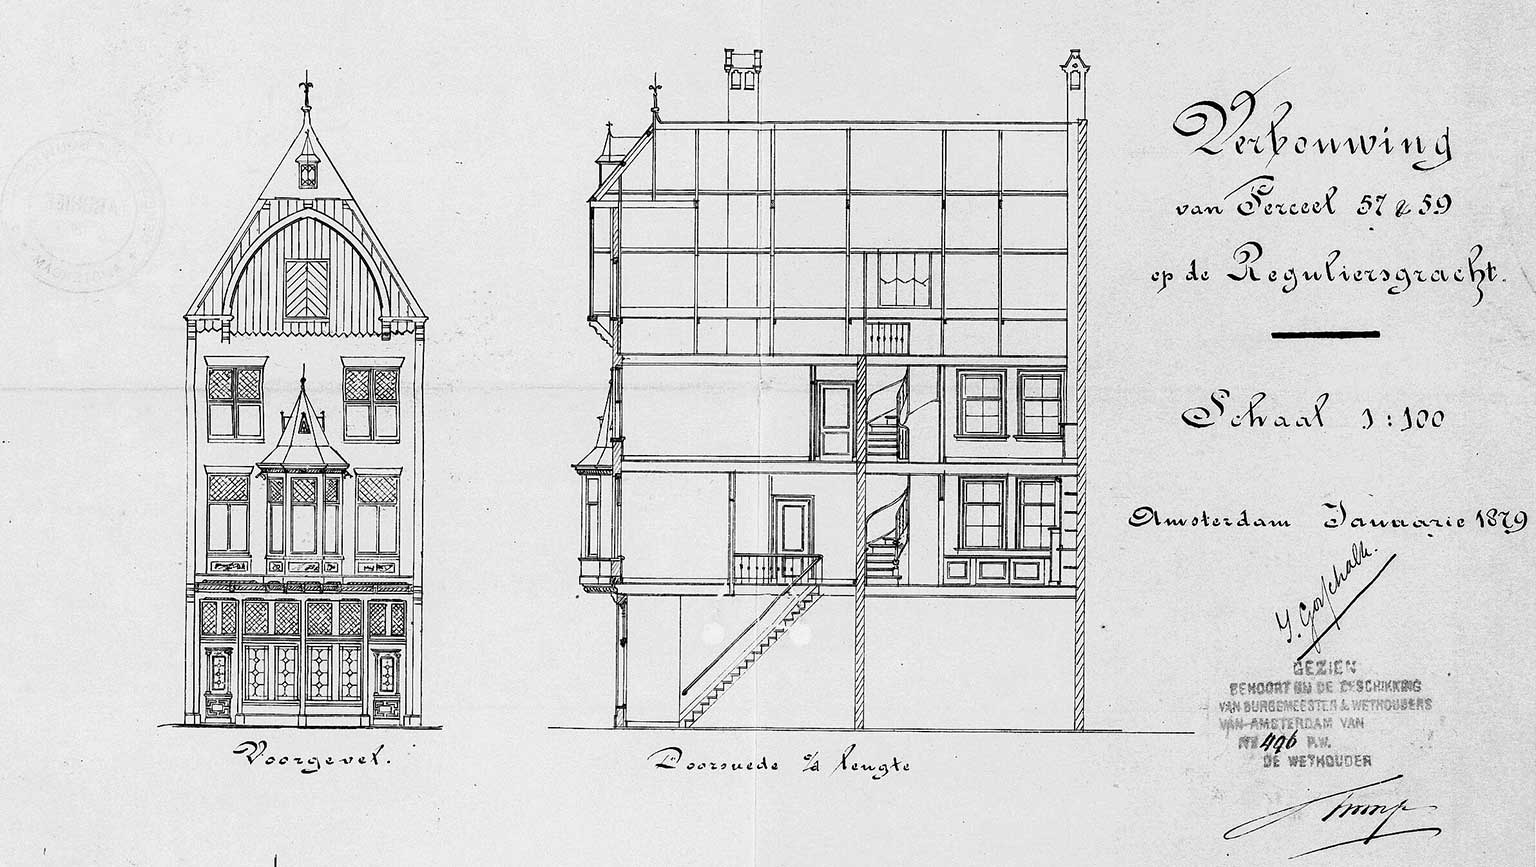 Reguliersgracht 57-59, Amsterdam, drawings from 1879 by architect Isaac Gosschalk